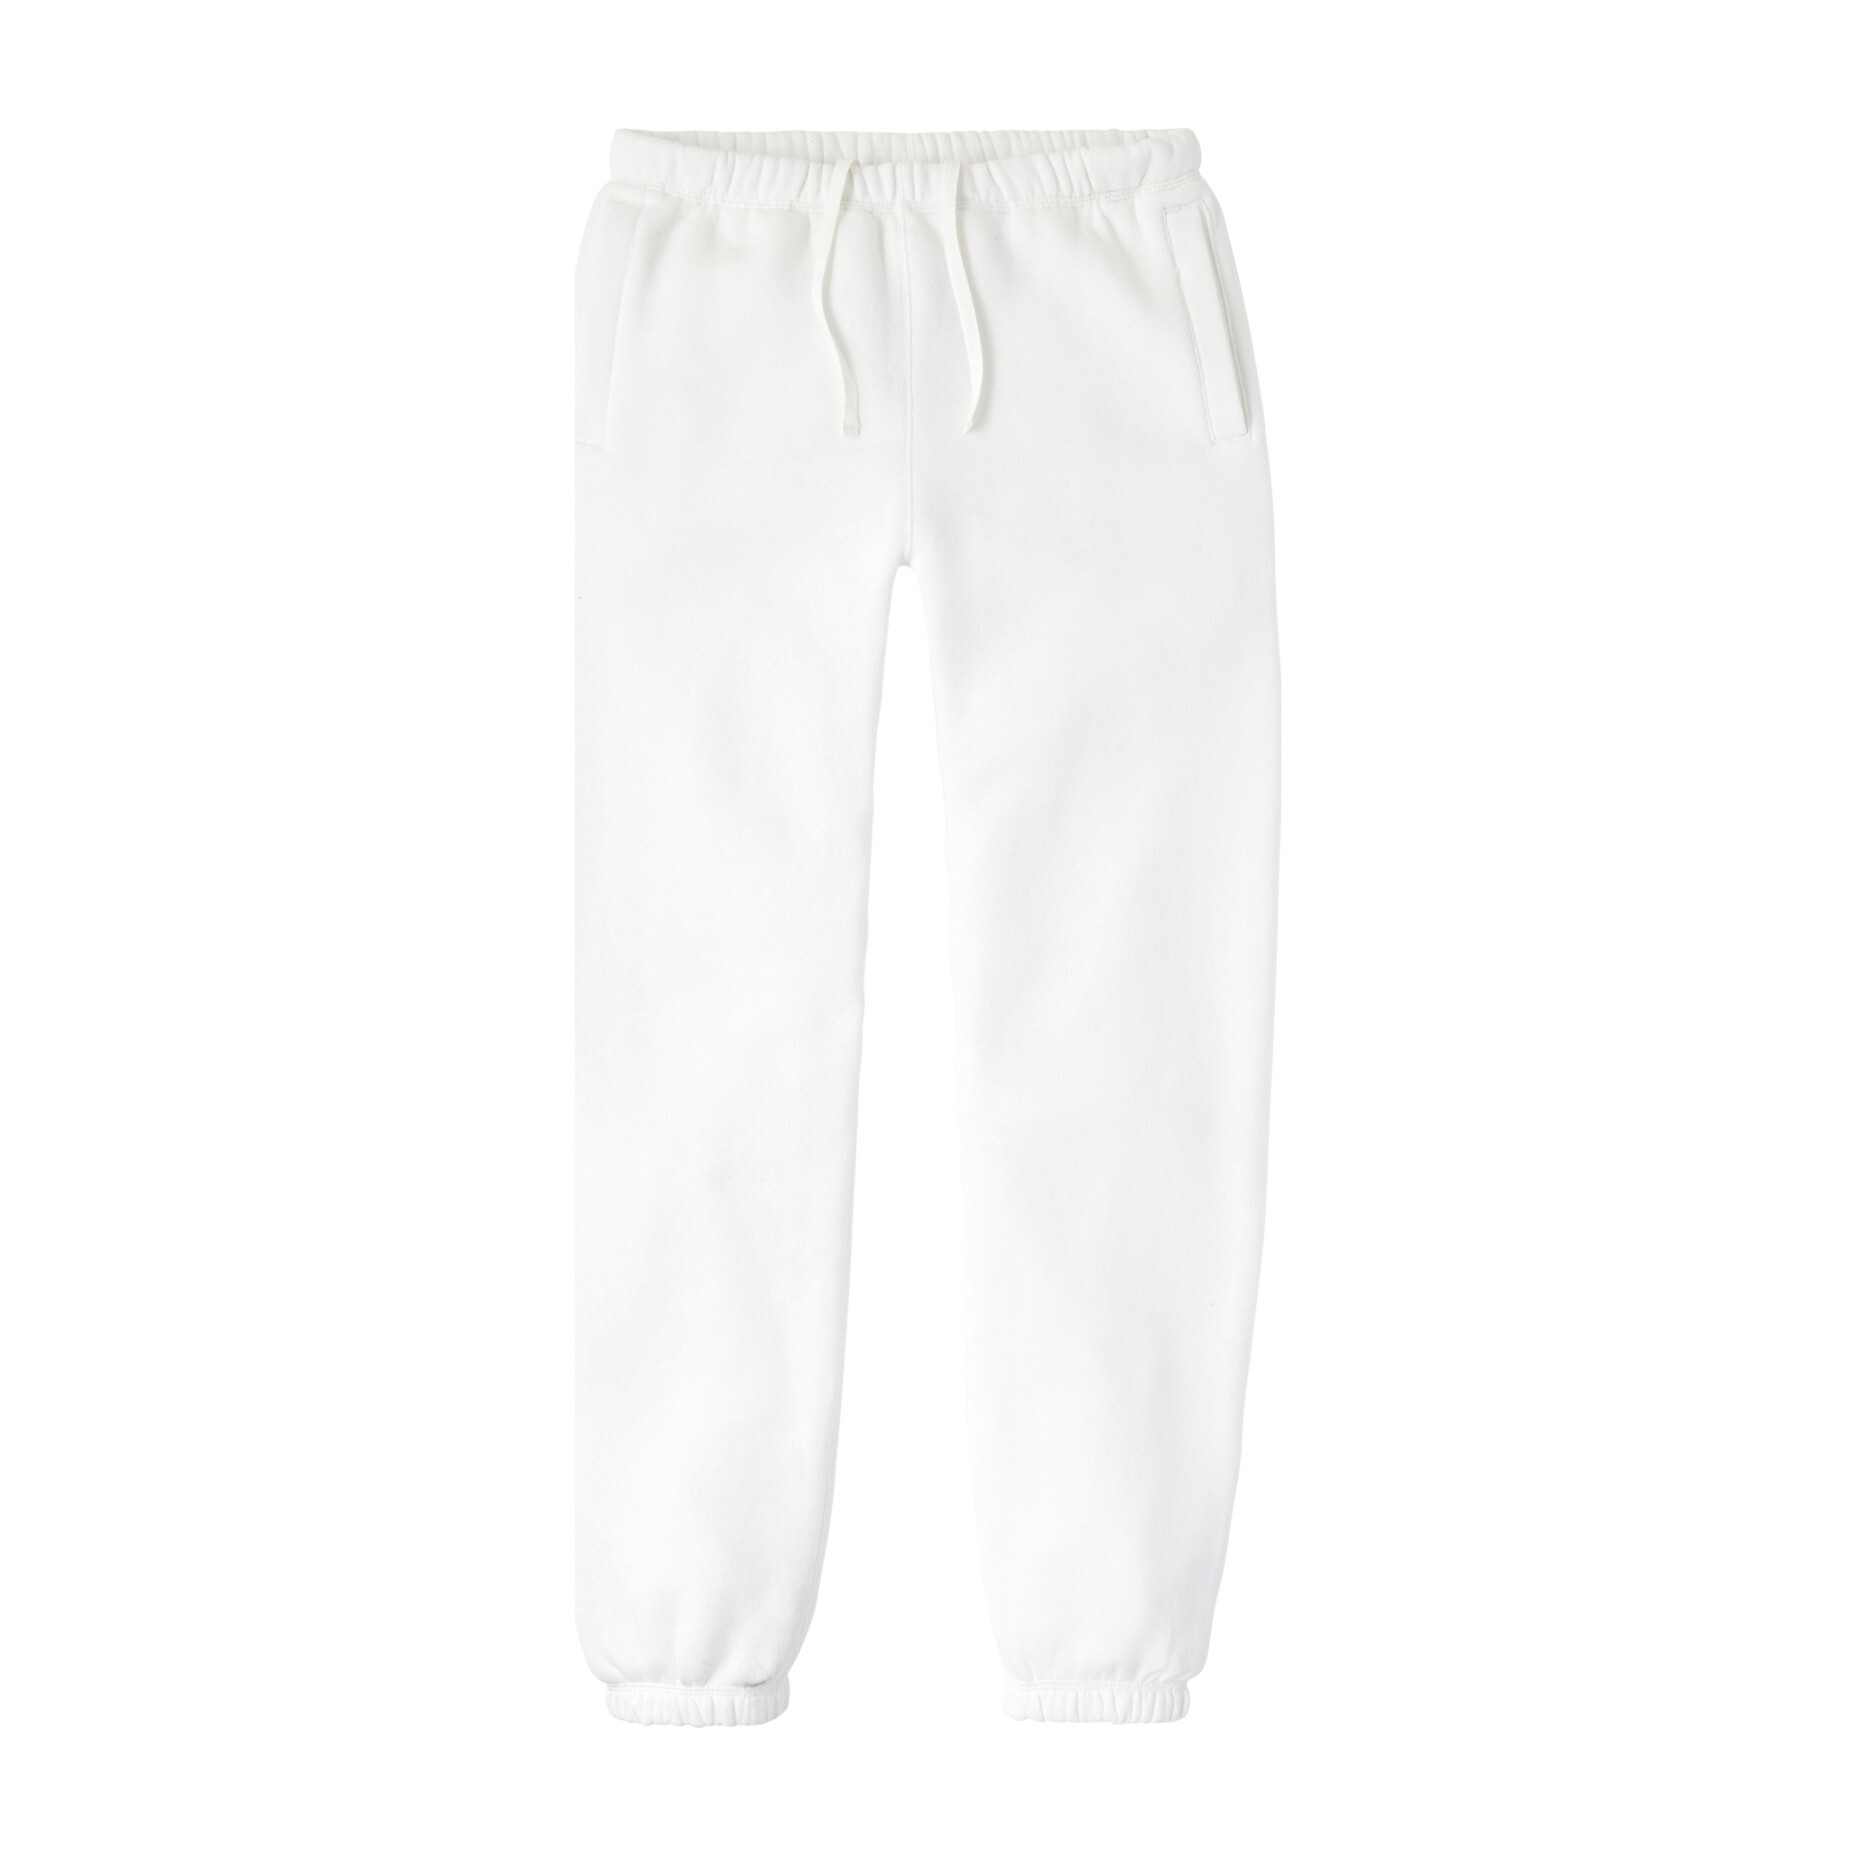 Women's Cozy Brushed Sweatpants, White - What's New Trending Exclusives ...